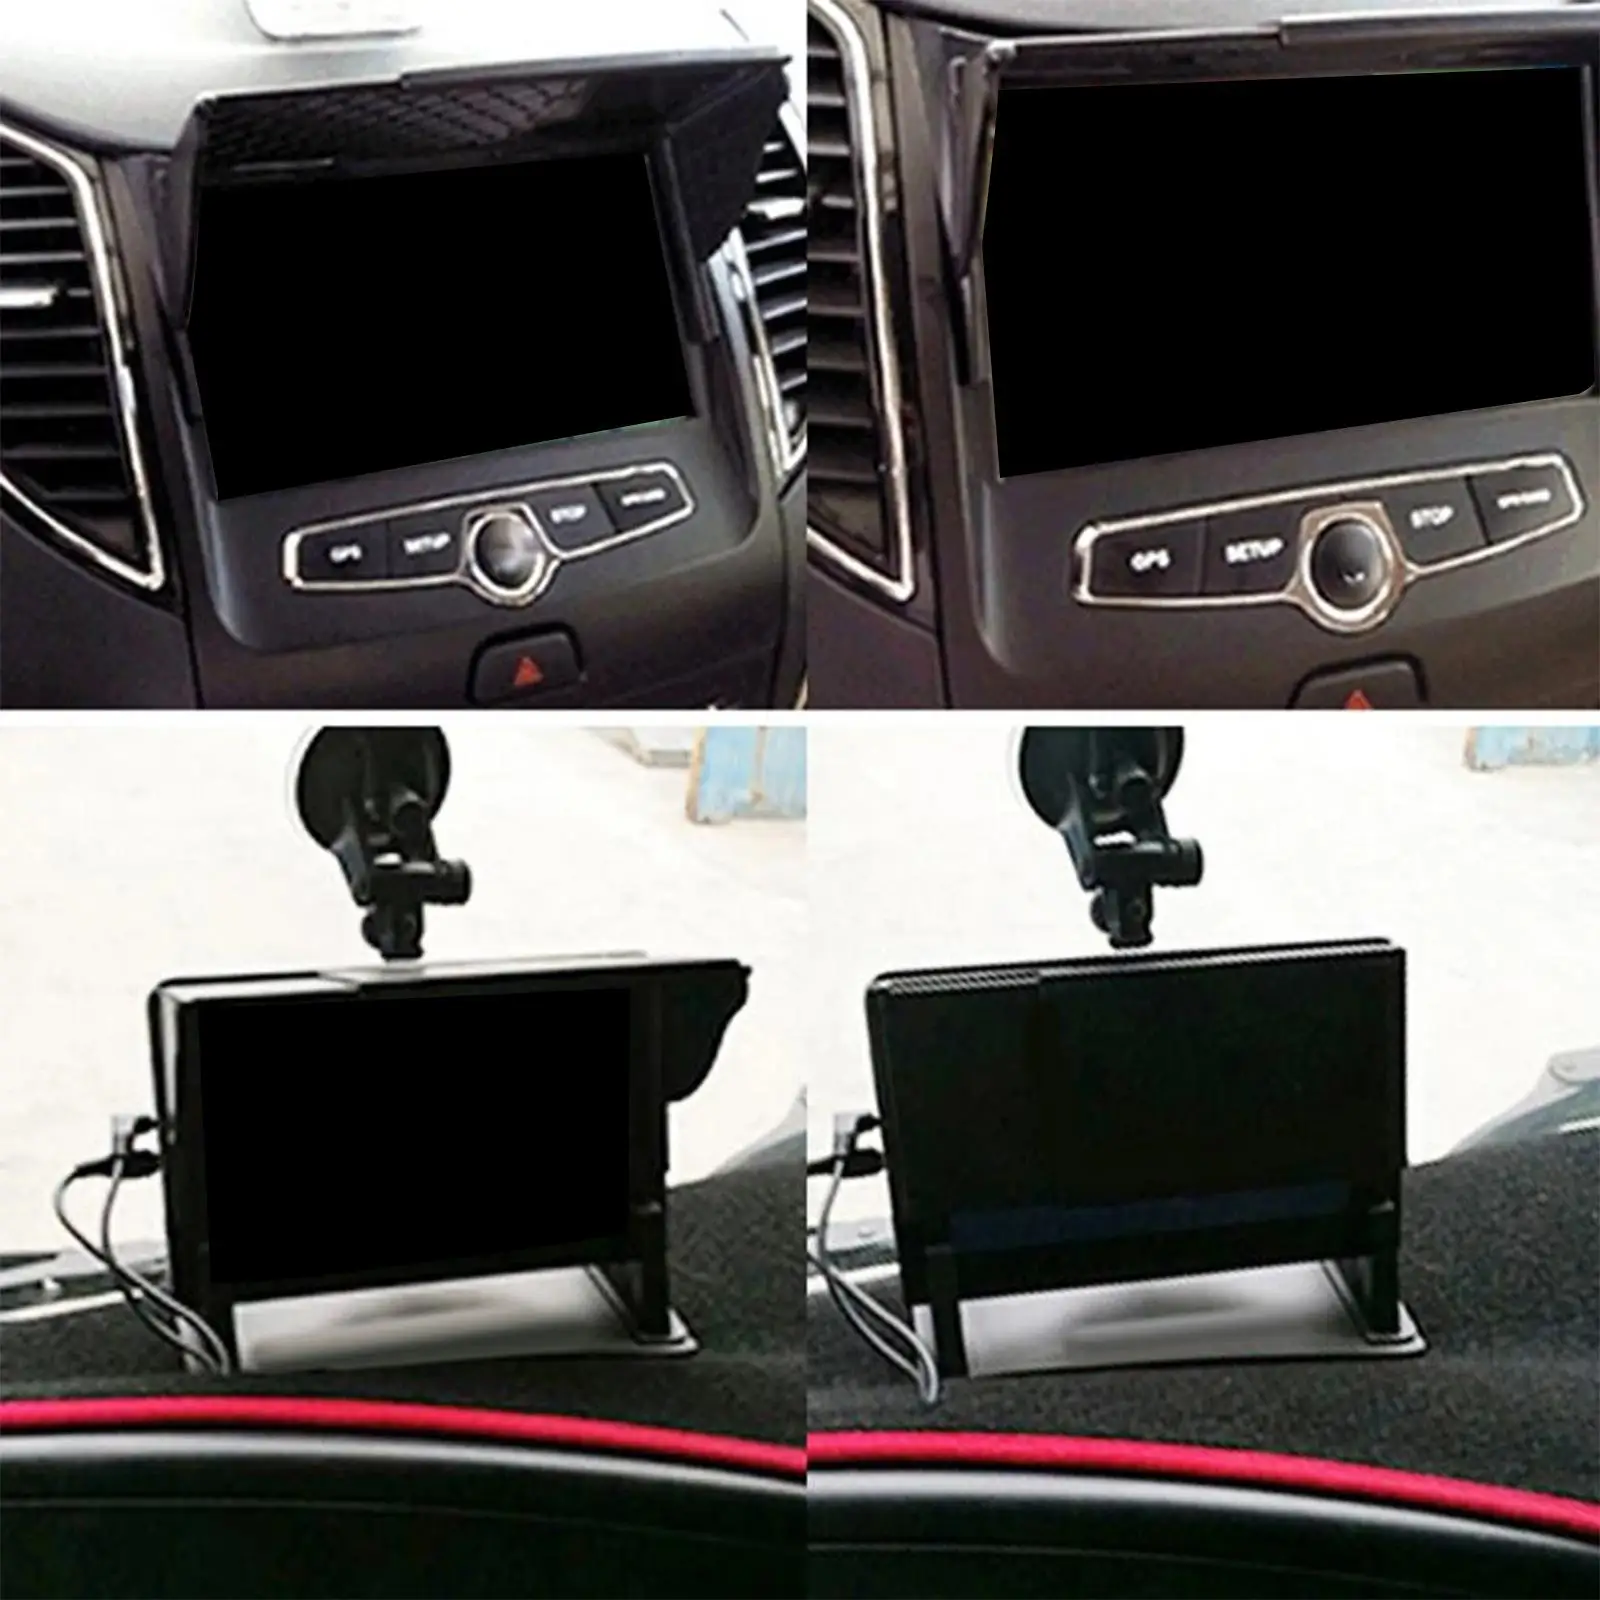 GPS Sunshade Truck Car Accessories Anti Reflection Hood Cover